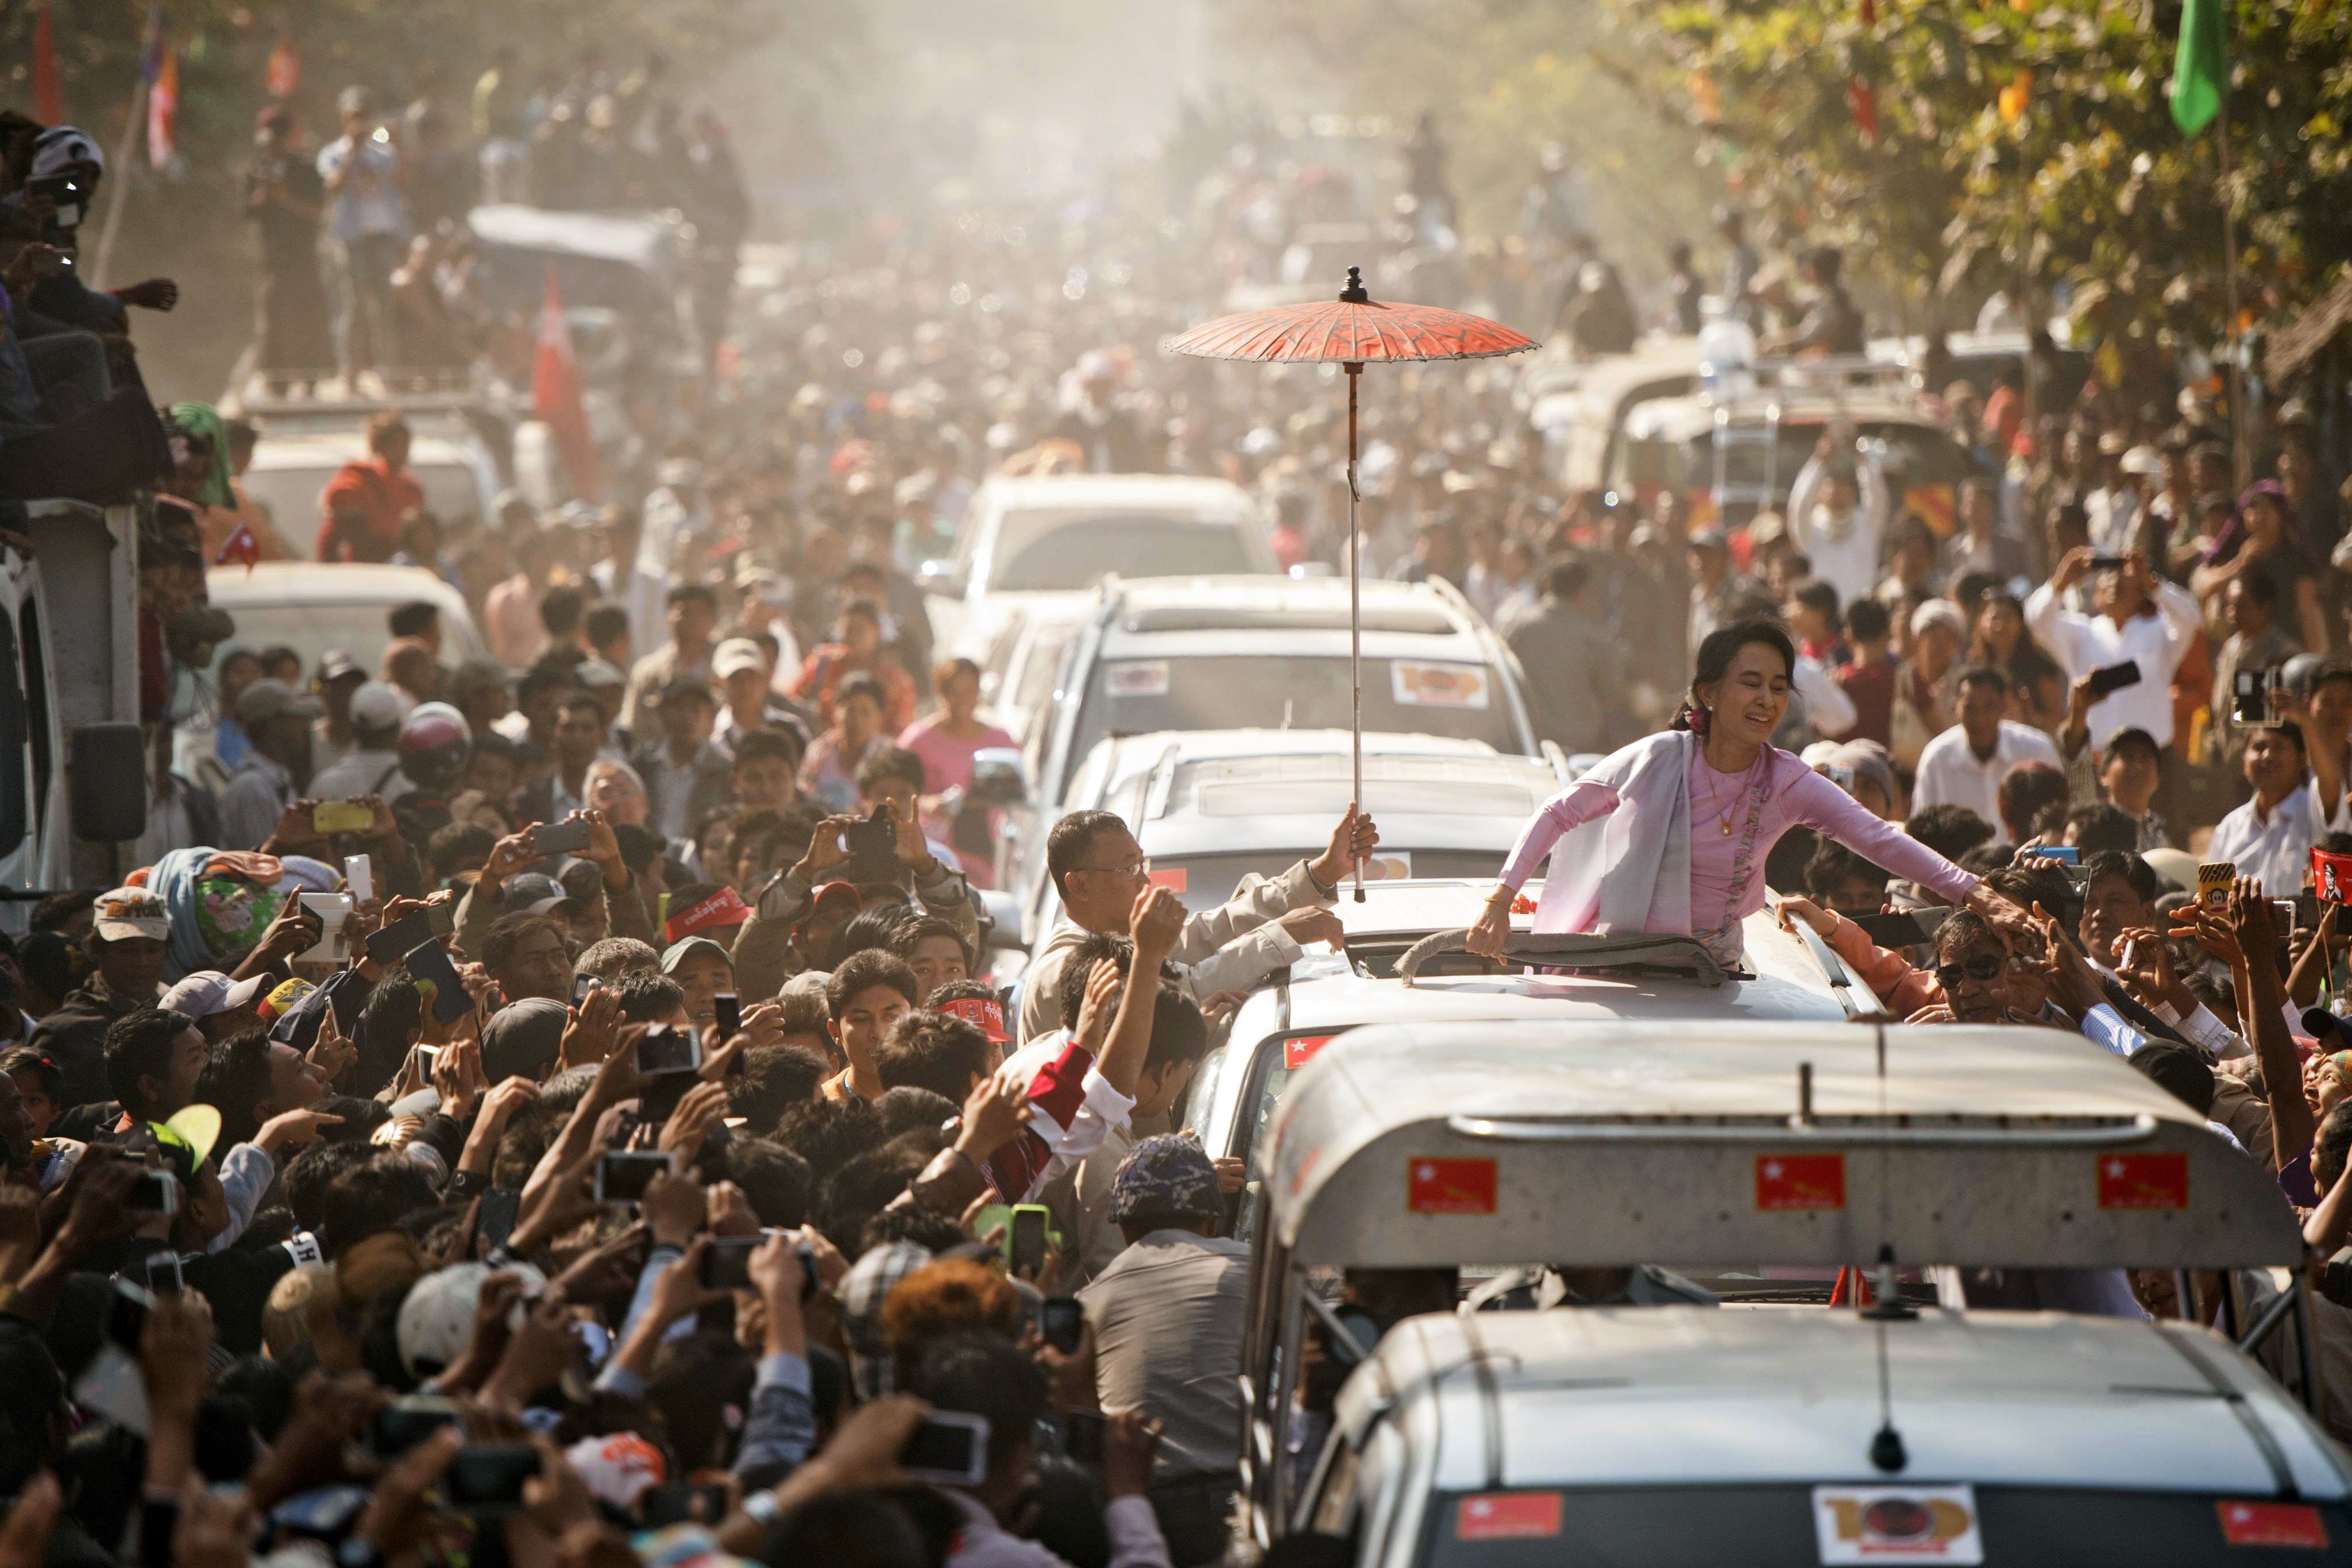 -- AFP PICTURES OF THE YEAR 2015 -- Myanmar opposition leader Aung San Suu Kyi greets supporters as she leaves a ceremony to mark the 100th birthday of independence hero Aung San, in the remote central Myanmar town of Natmauk on February 13, 2015. Known affectionately as "Bogyoke", or General, Aung San is adored in Myanmar and credited with unshackling the country from colonial rule and embracing its ethnic minorities in a vision of unity that unraveled catastrophically in the military-dominated decades that followed his 1947 assassination. AFP PHOTO / YE AUNG THU